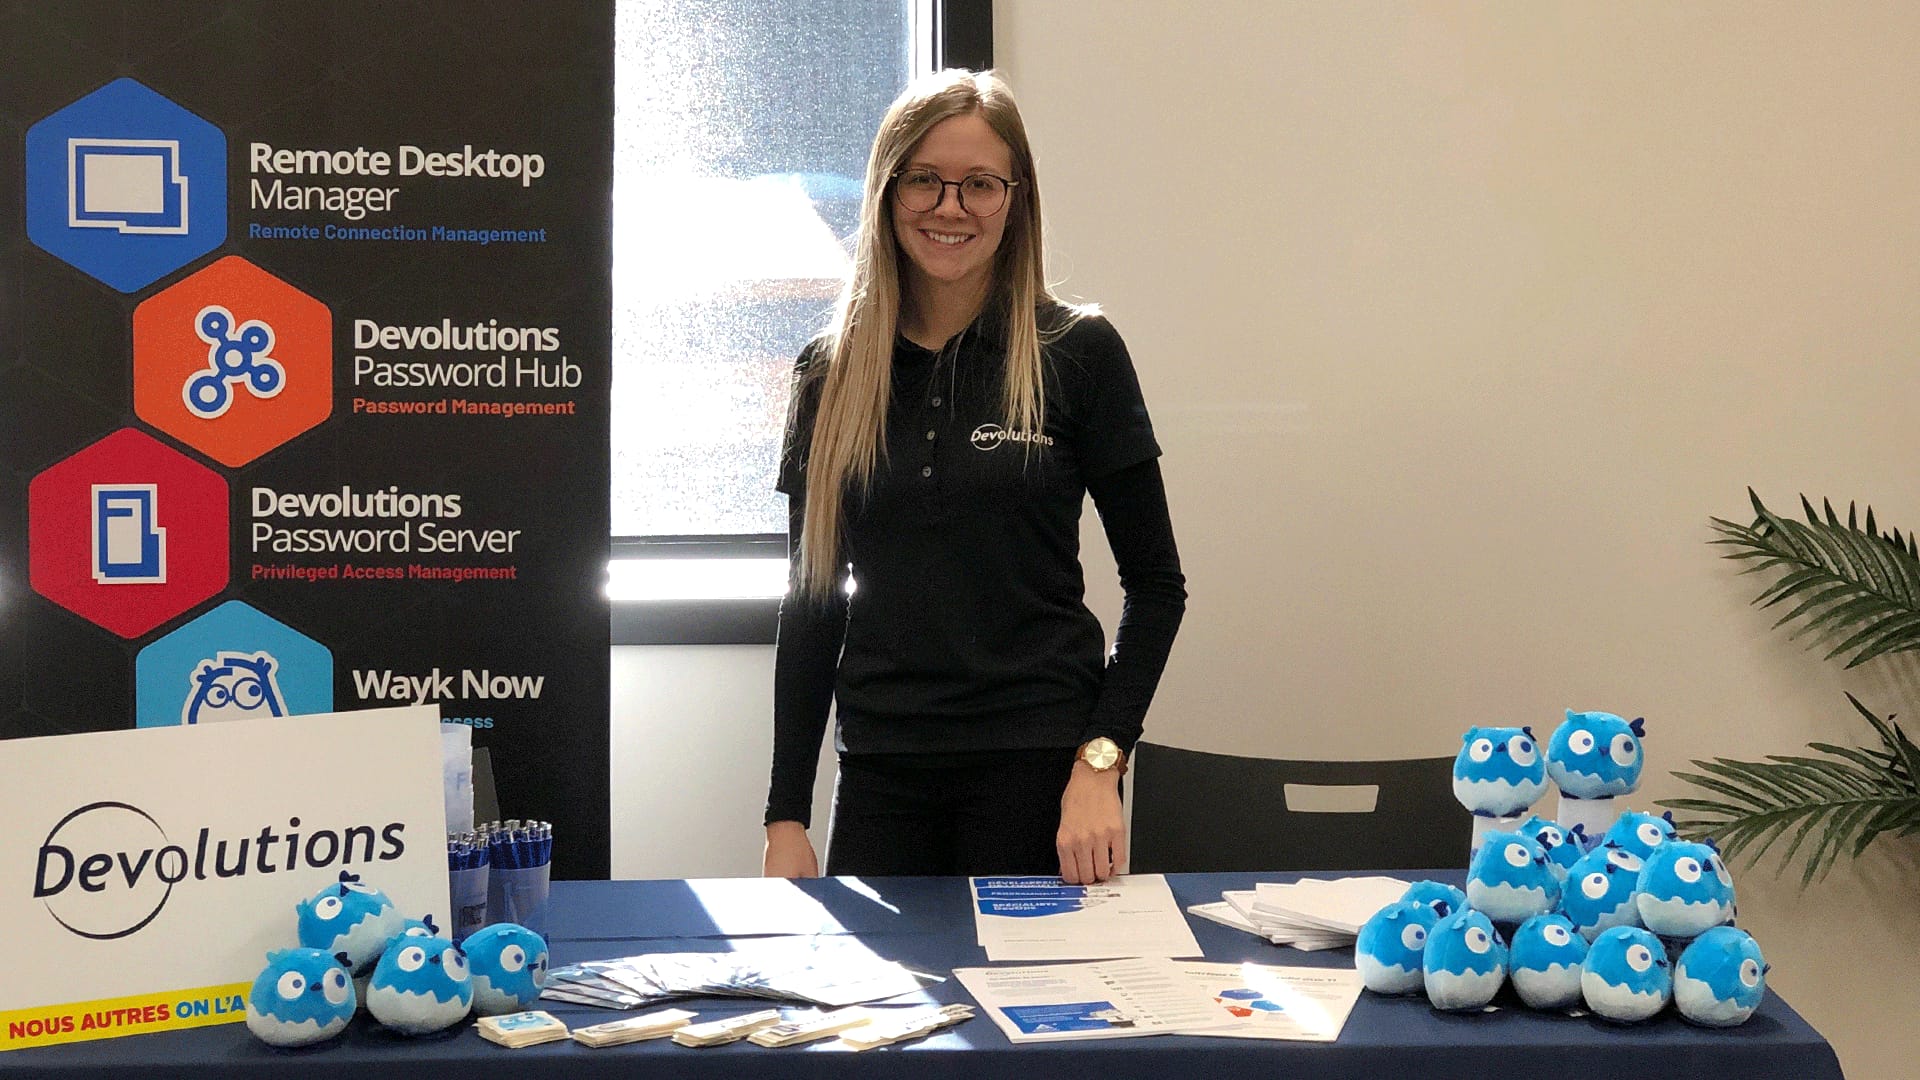 October 25, 2019: At the Job Fair in Lavaltrie